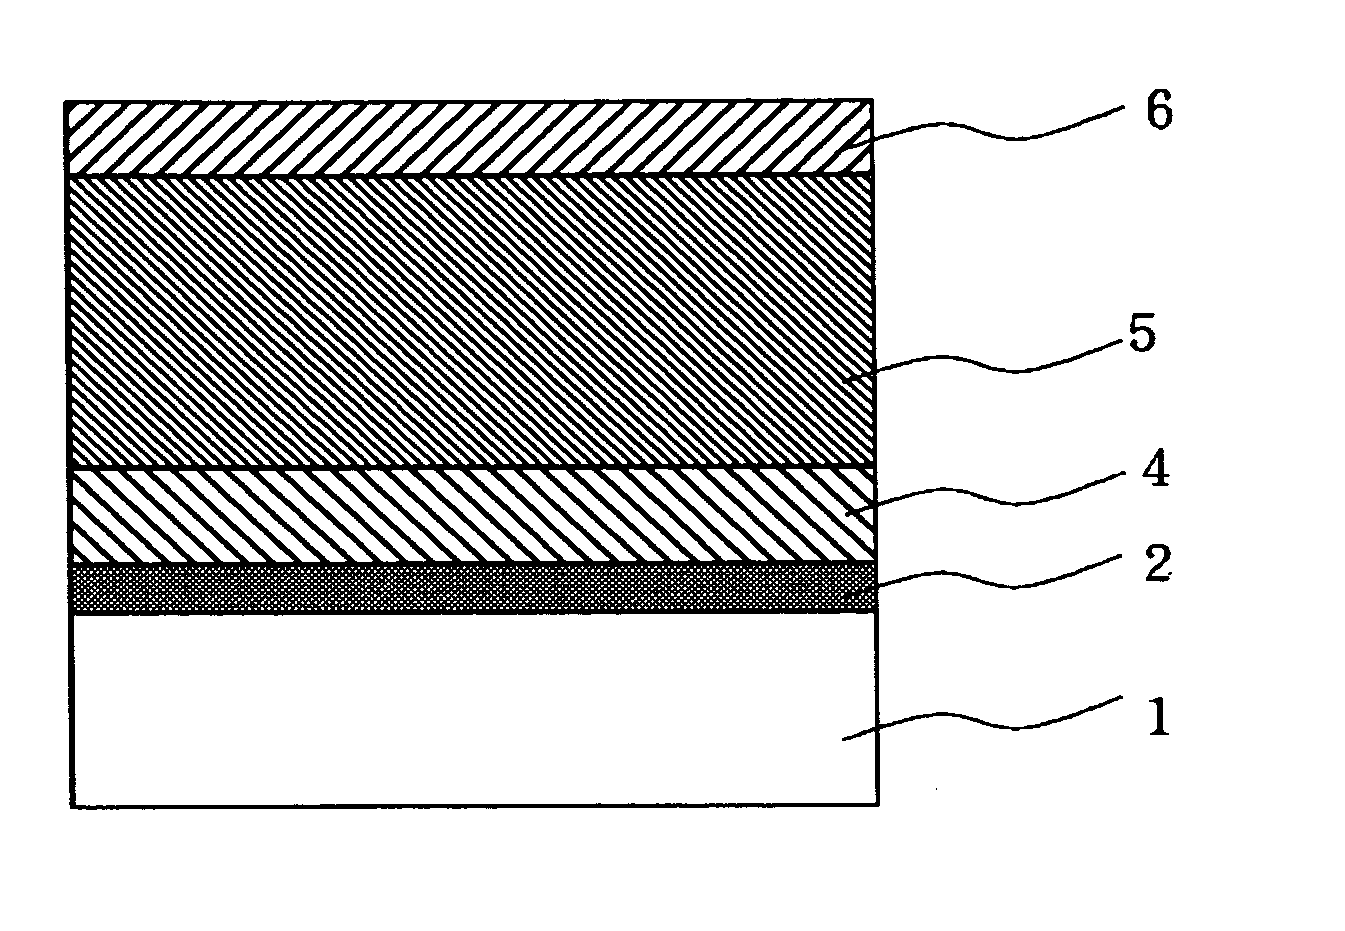 Electrophotographic photoconductor and methods therefor